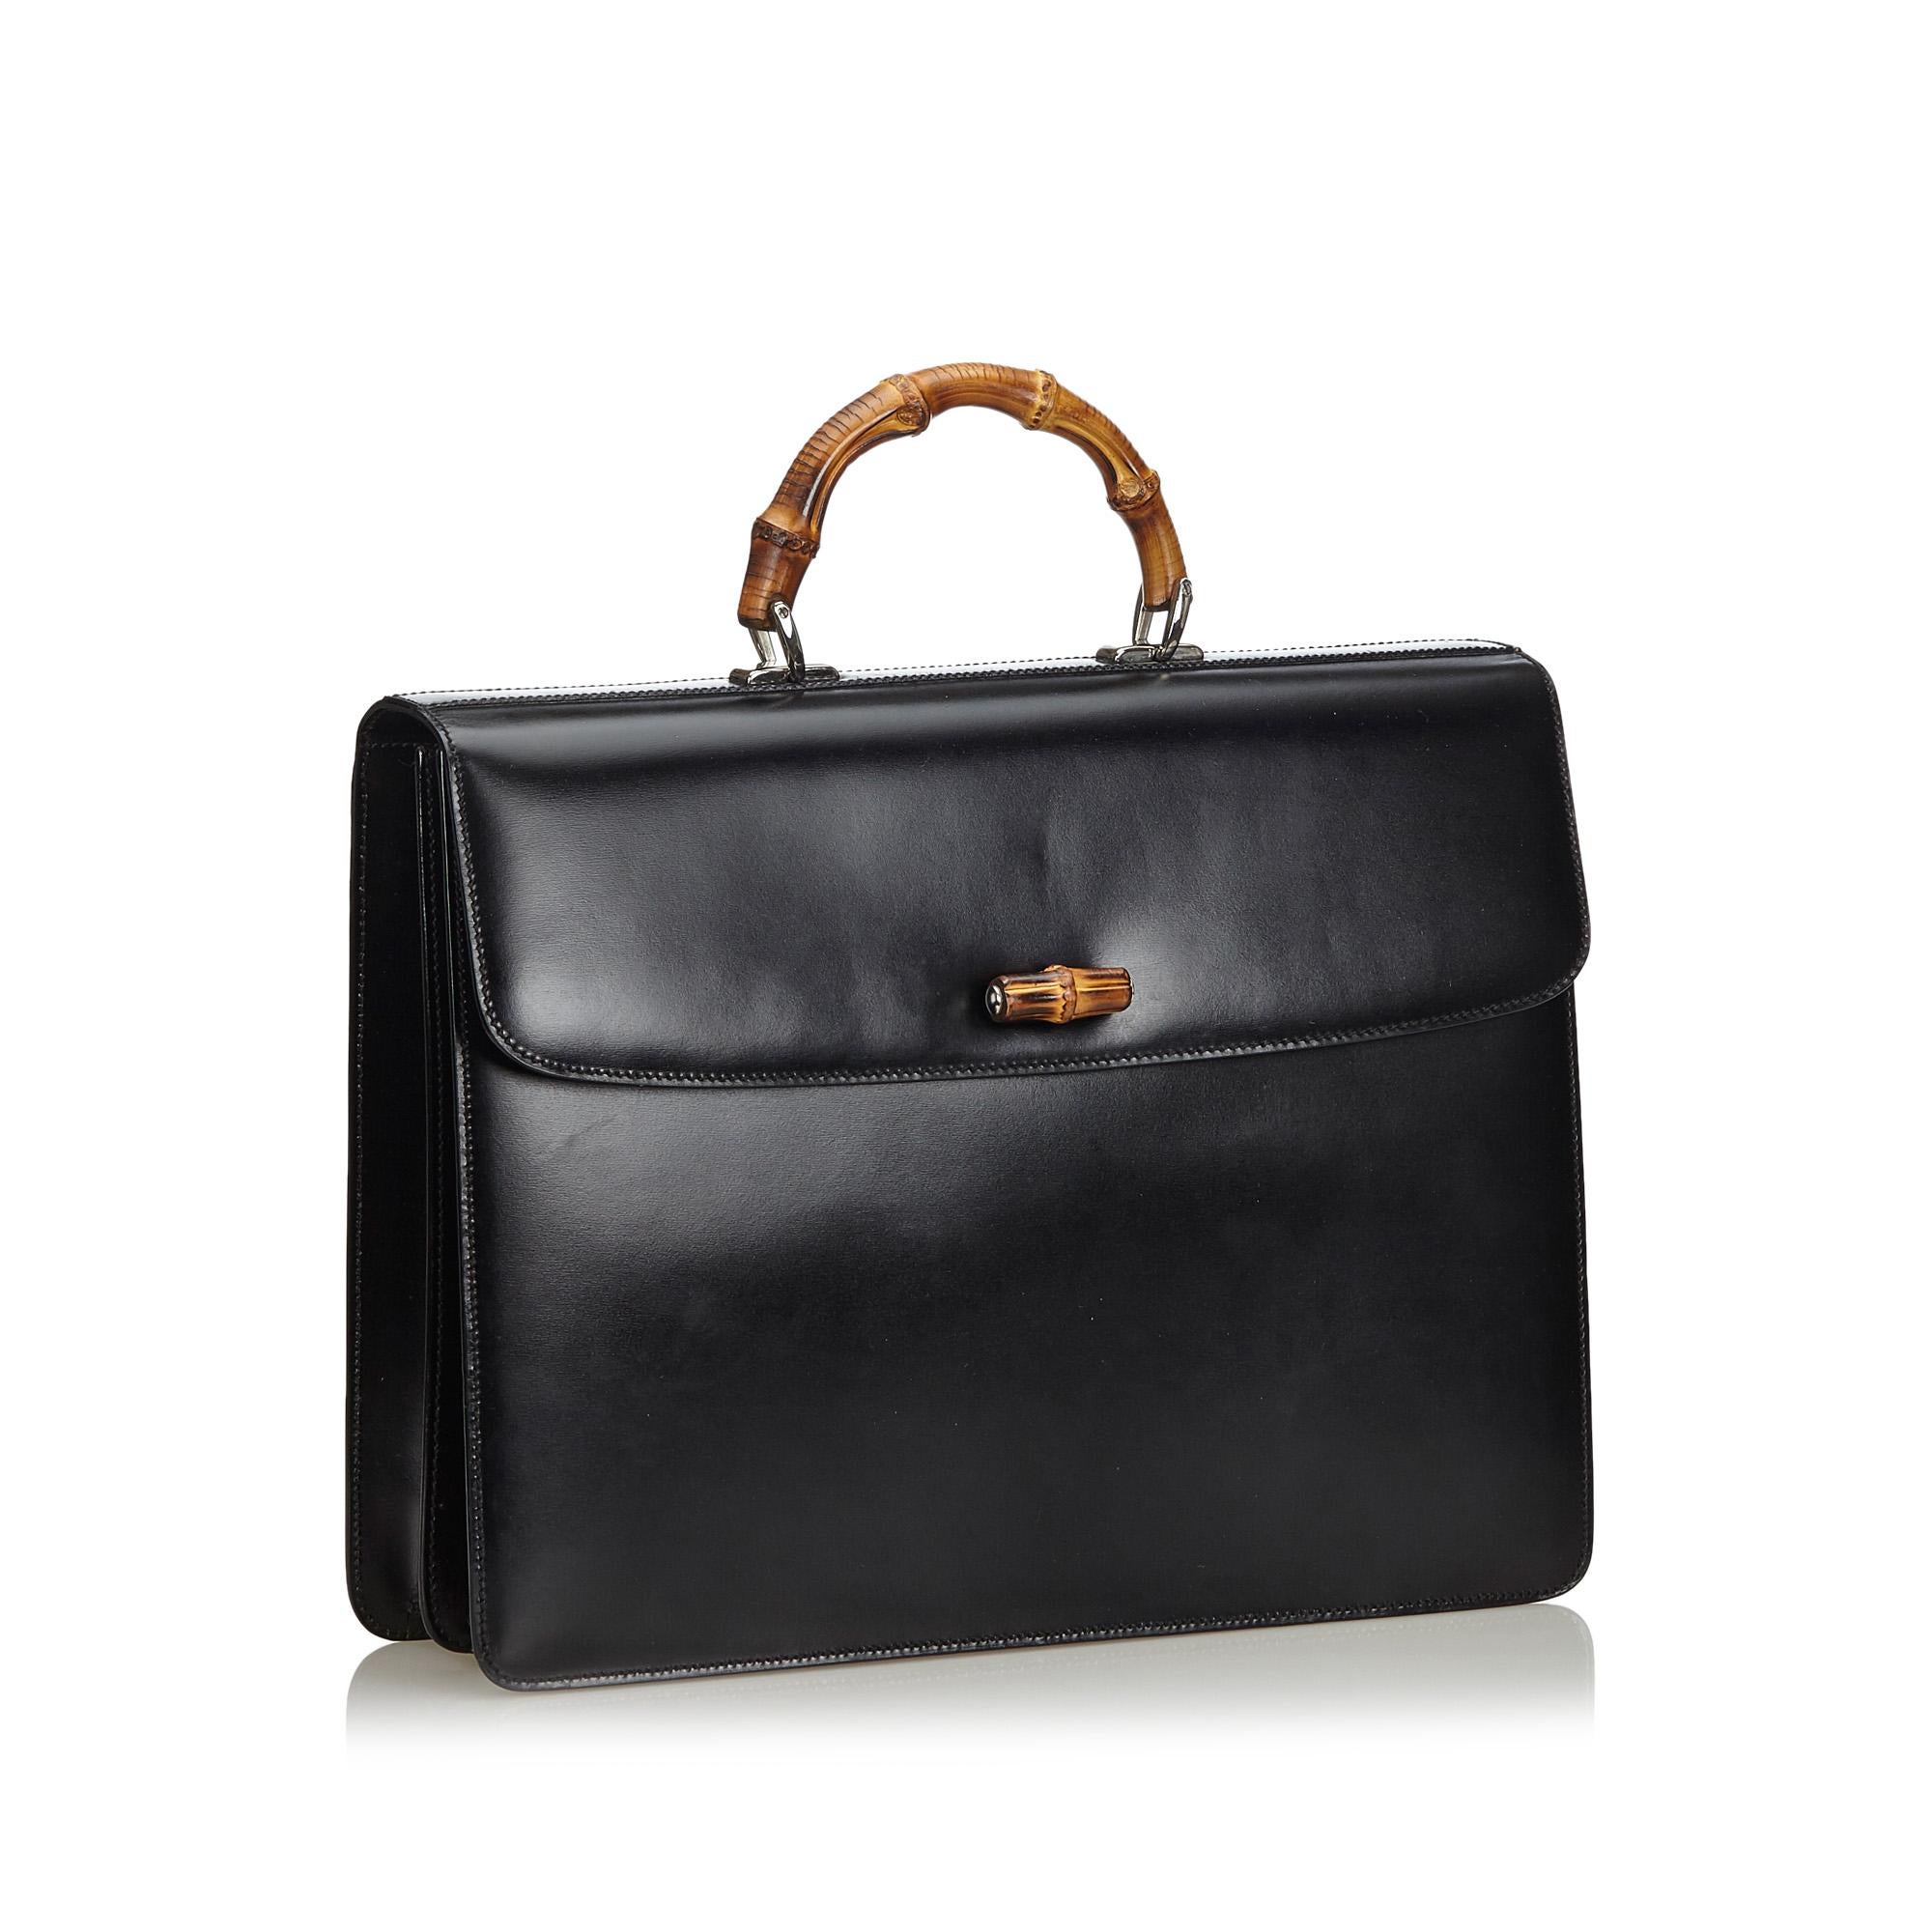 Gucci Bamboo Leather Briefcase

This briefcase features a leather body, a bamboo top handle, a front flap with a twist lock bamboo closure, interior slip compartments, and an interior zip pocket. 

Approx. Length: 10 cm. Width: 19 cm. Depth: 2 cm.